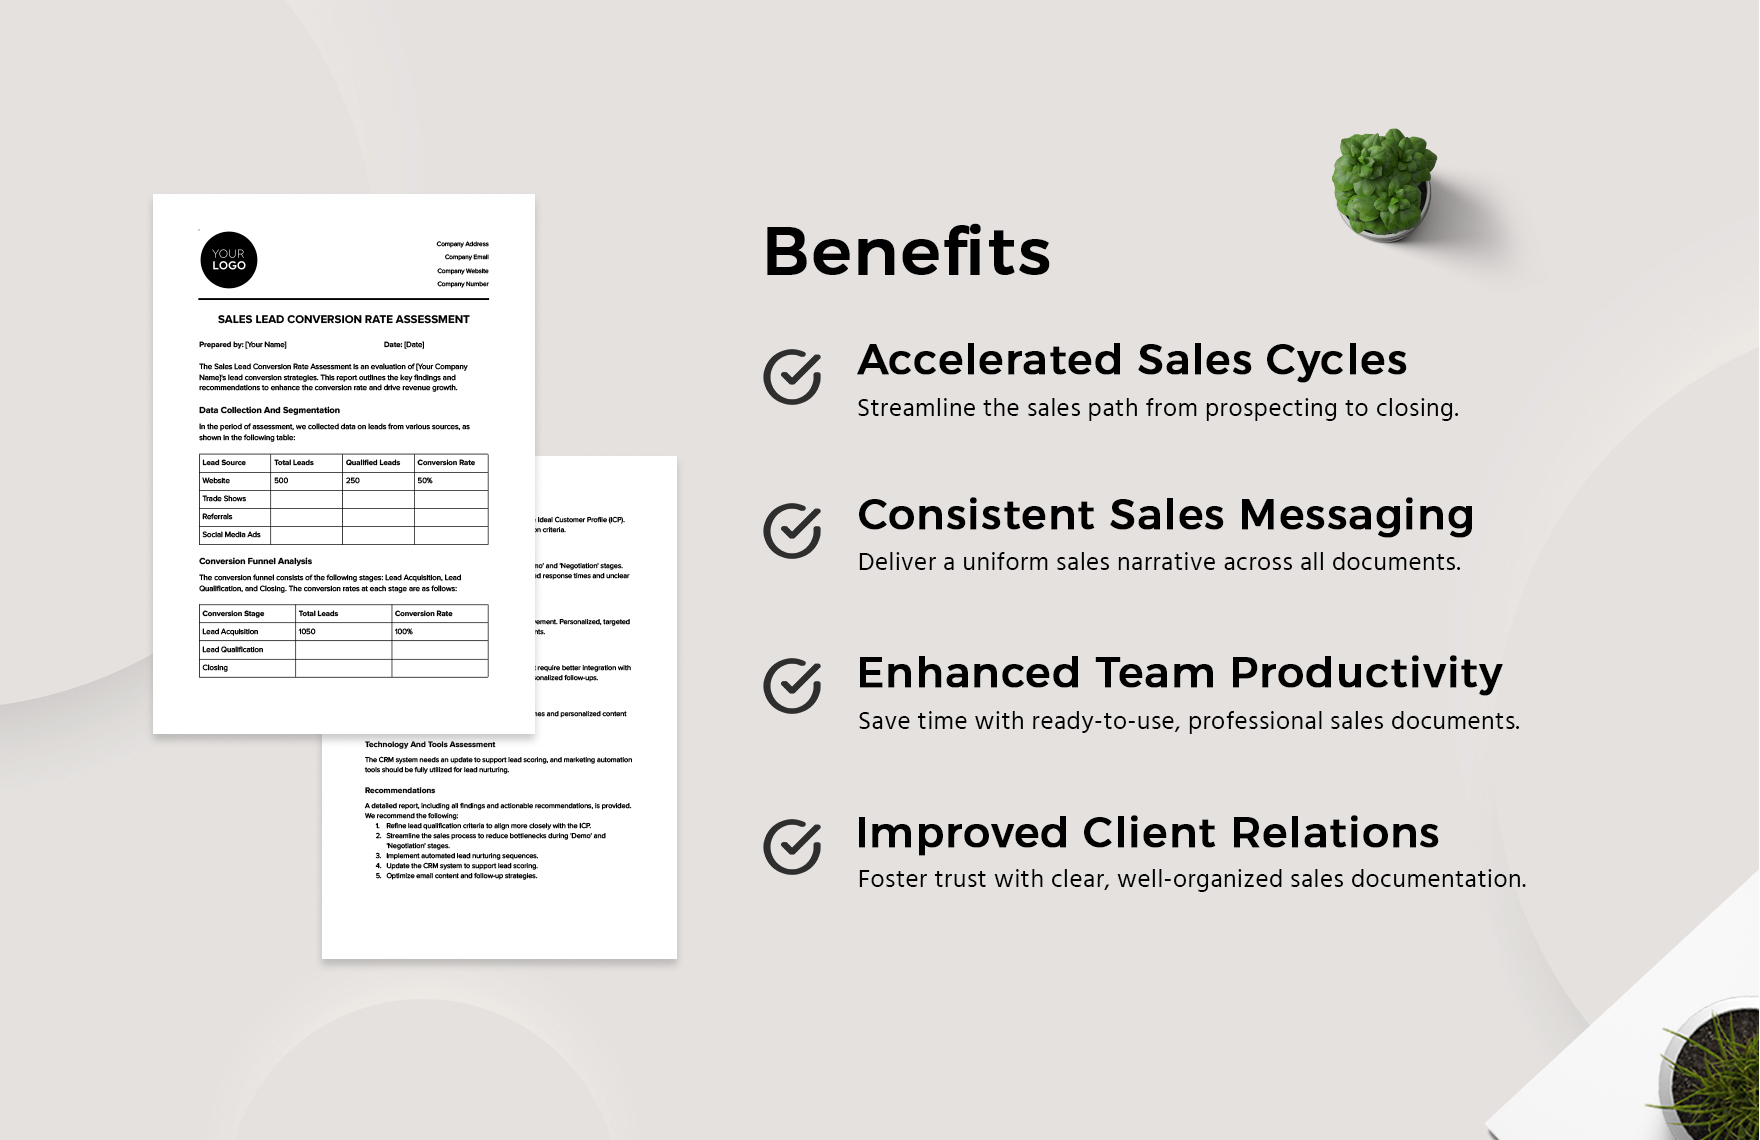  Sales Lead Conversion Rate Assessment Template